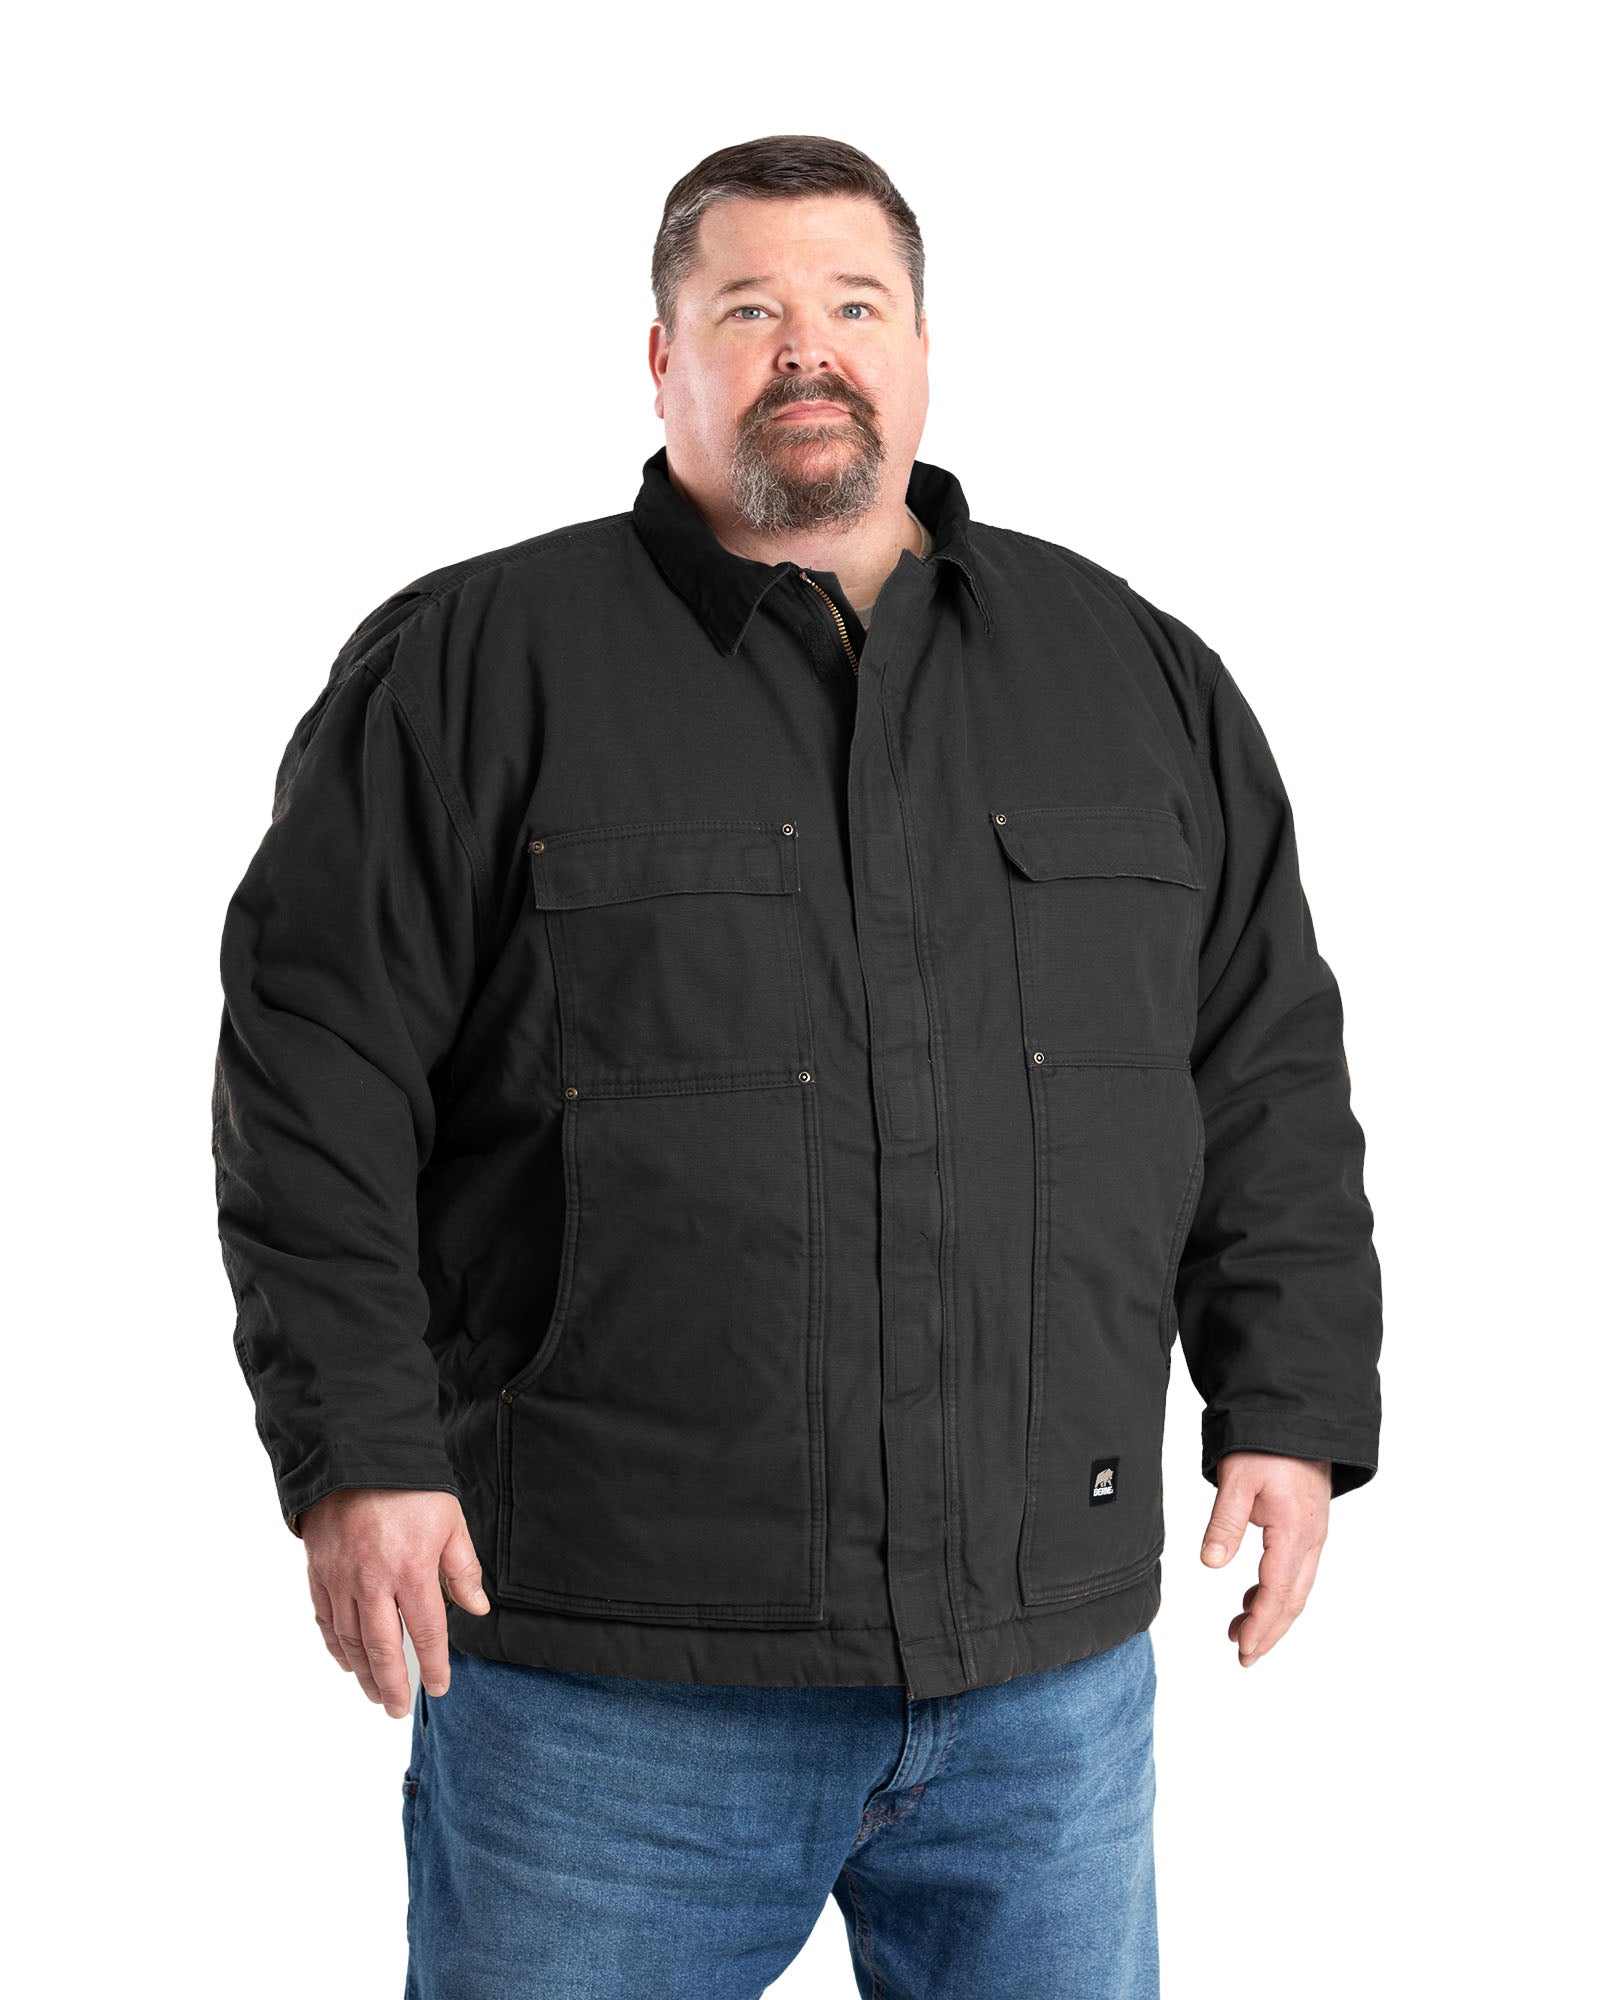 Charcoal Garment Washed Quilted Jacket XL – Howell's Mercantile